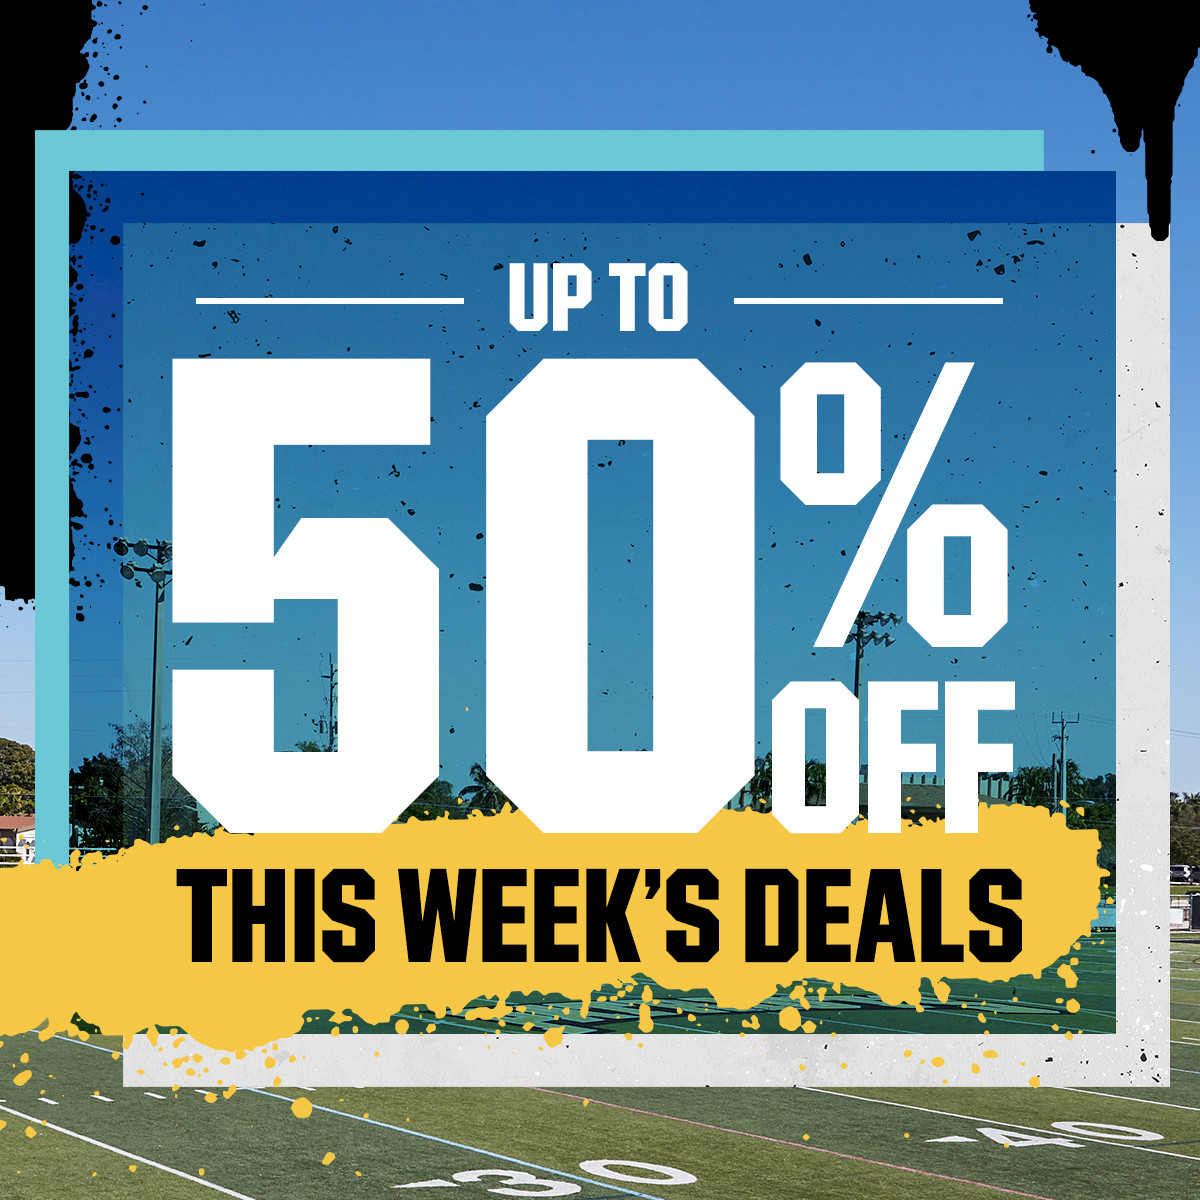  Up to 50% off this week's deals.